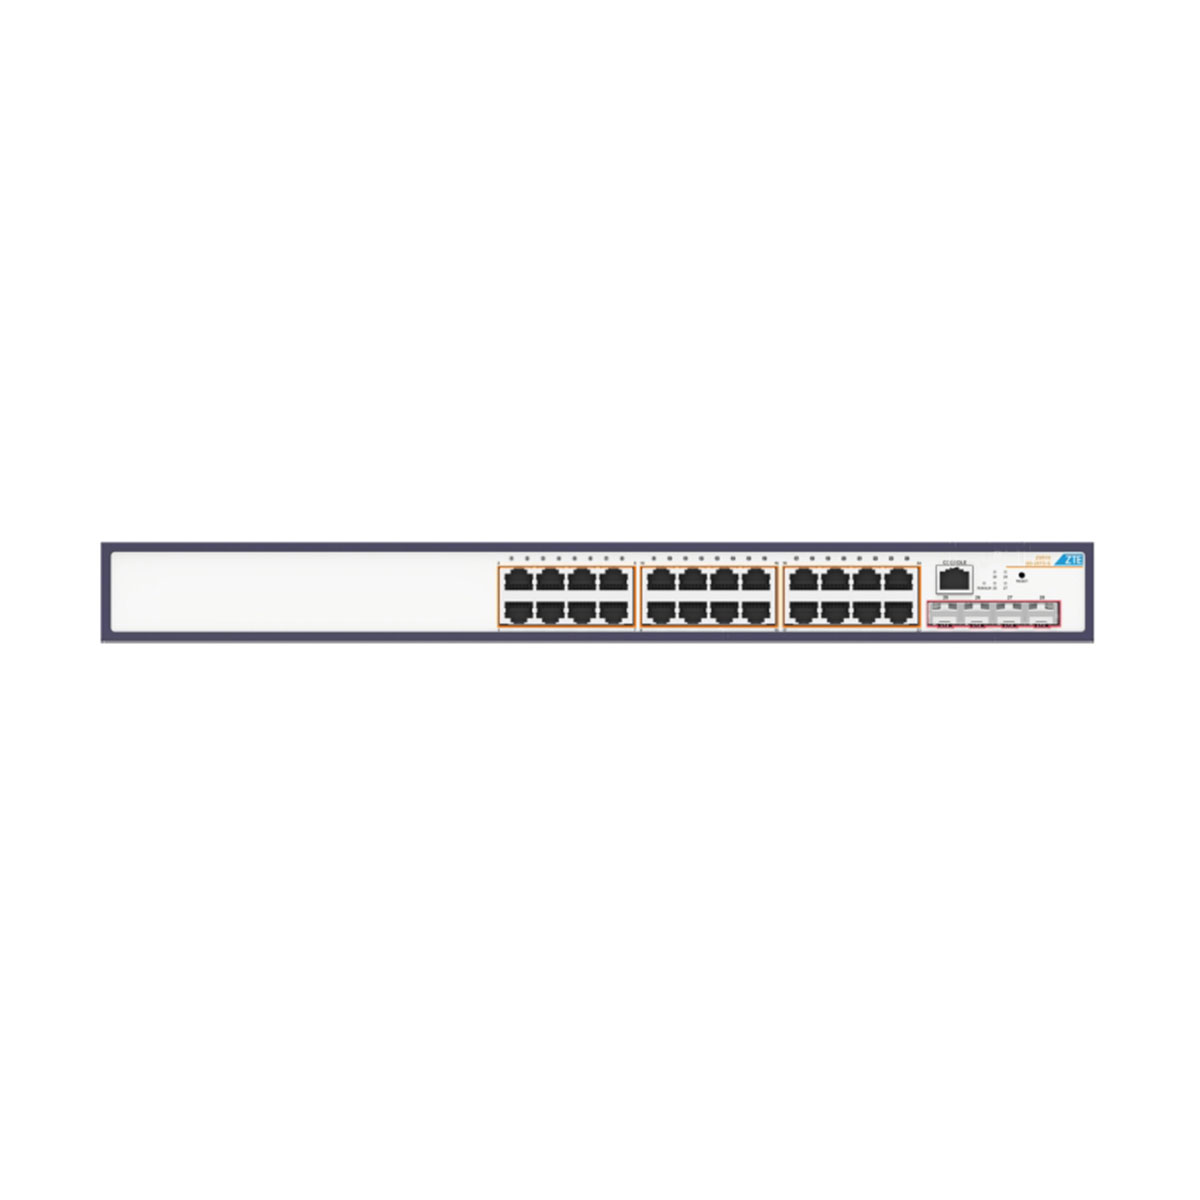 ZTE 5260-28TD-S Switch Best Price At Telecomate.com